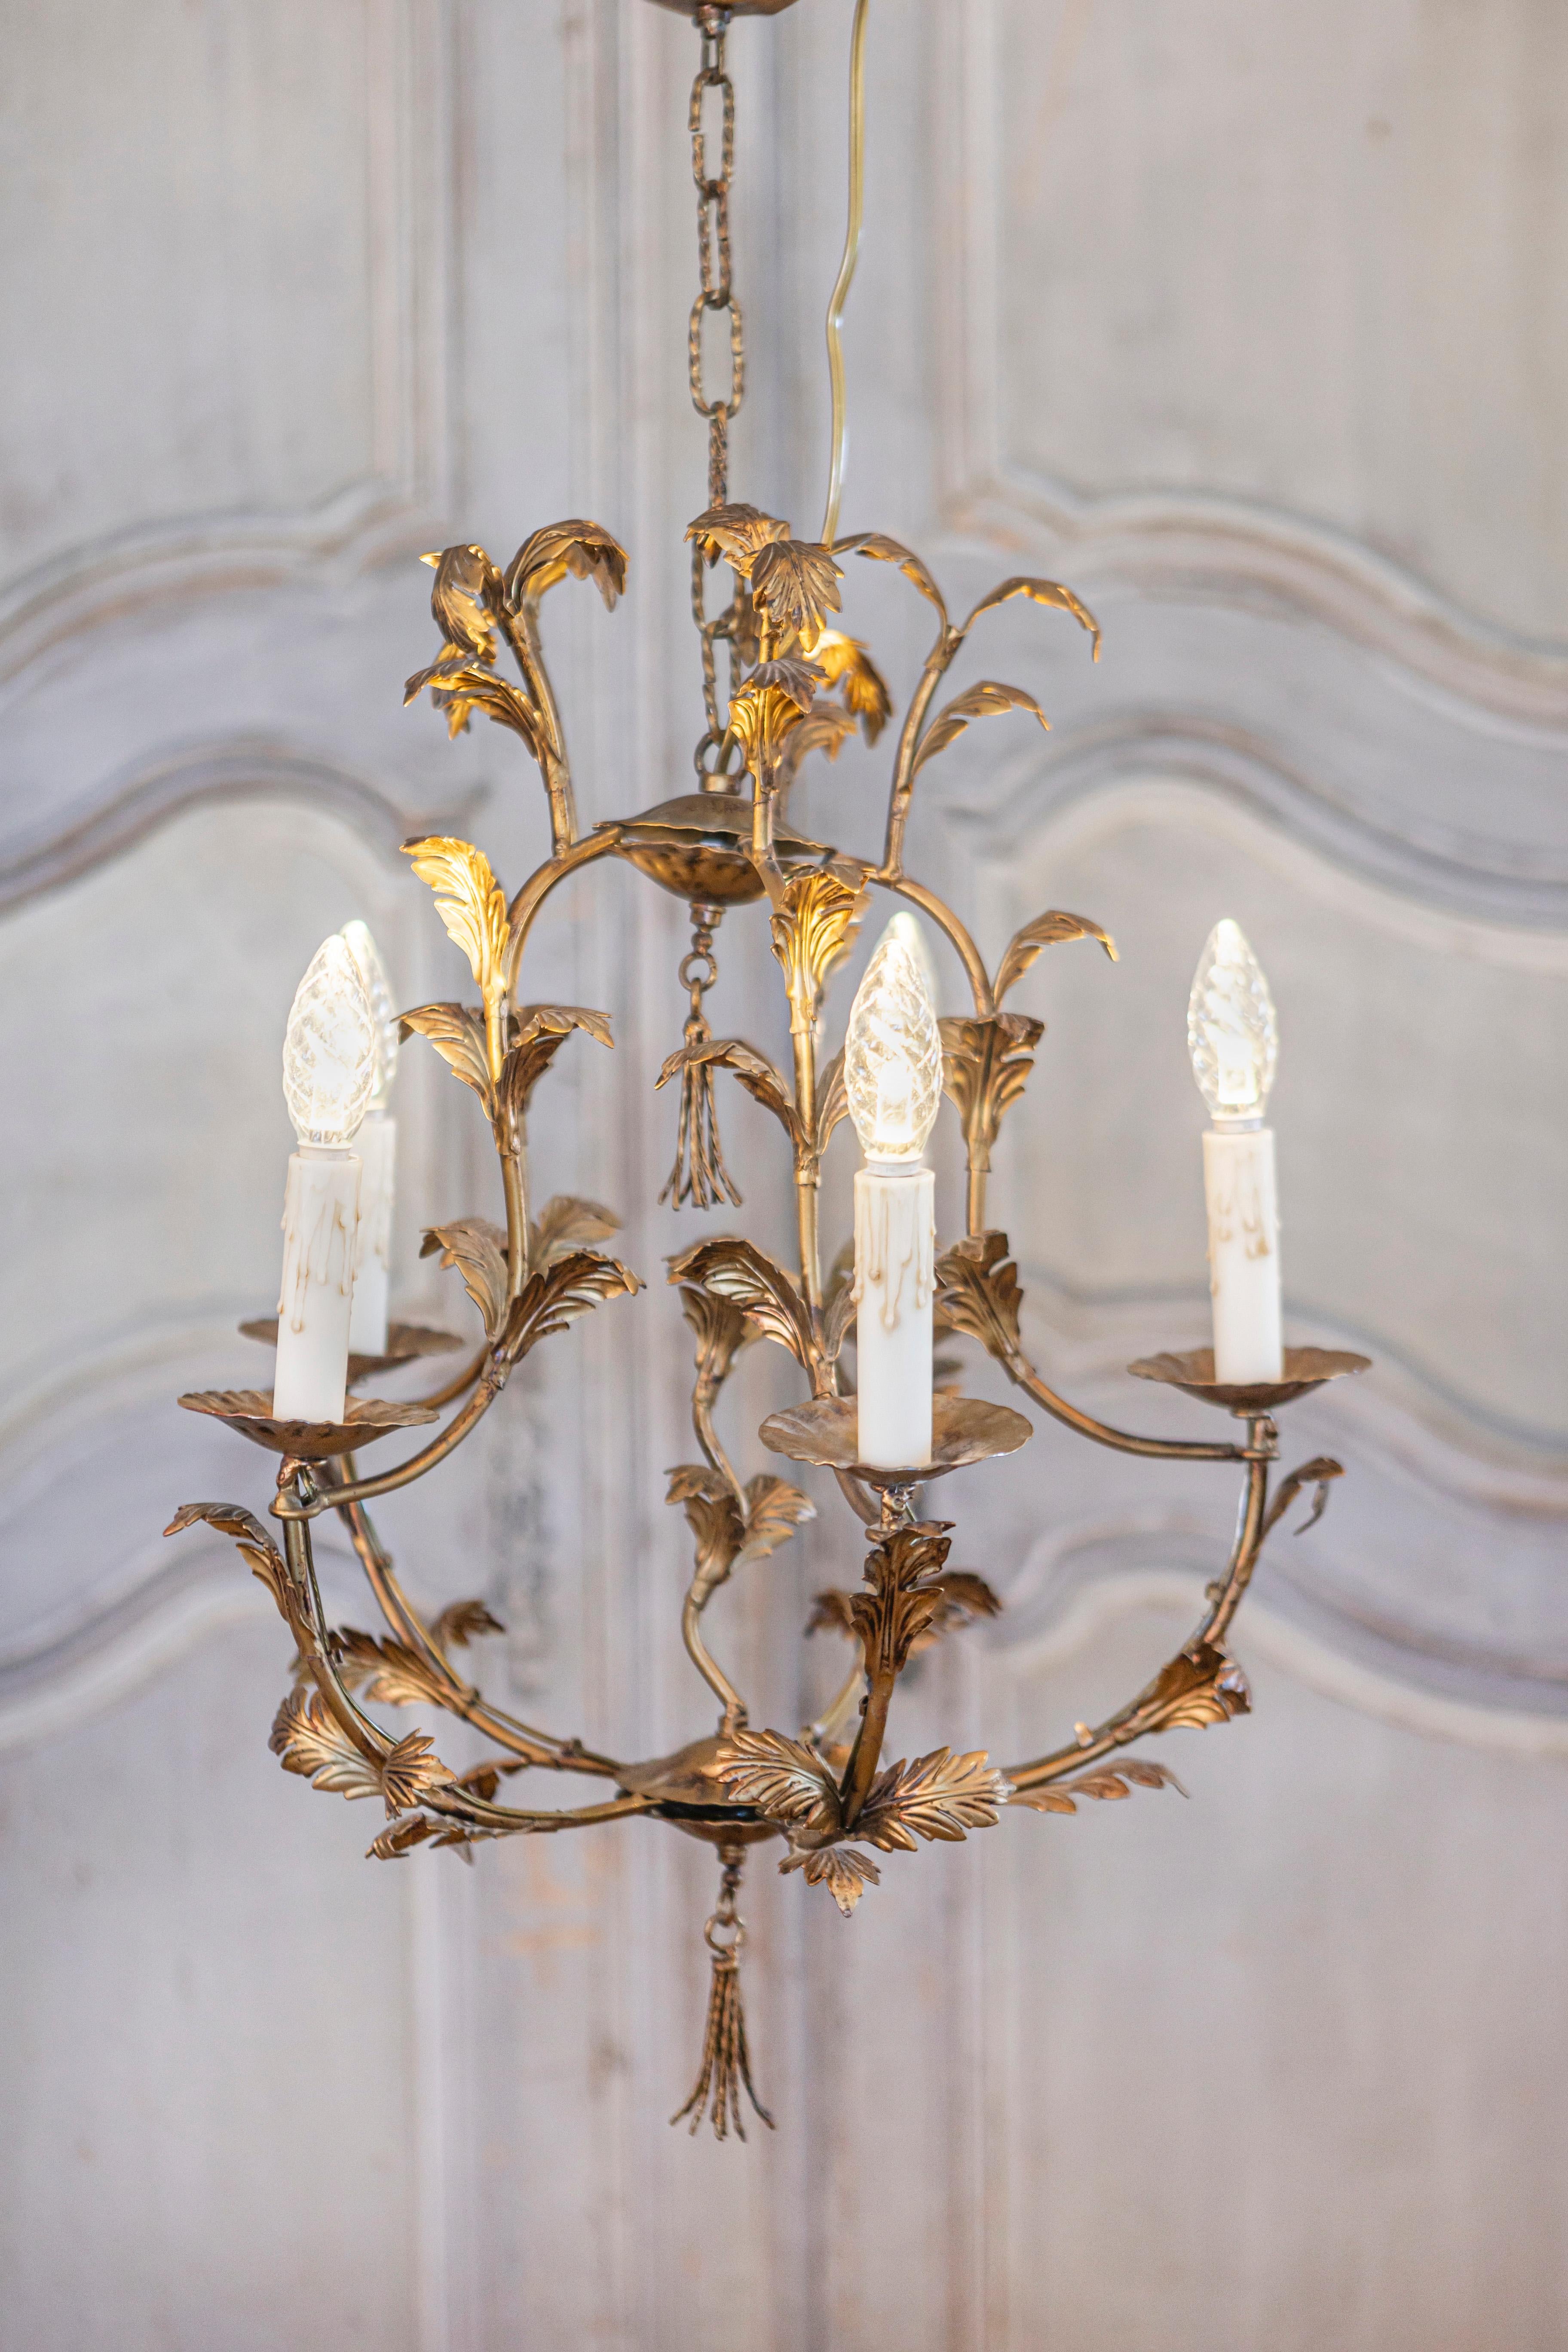 A French gilt metal five-light chandelier from the 20th century inspired by Maison Charles. This elegant French gilt metal five-light chandelier from the 20th century, inspired by the prestigious Maison Charles, exhibits an exquisite design with its